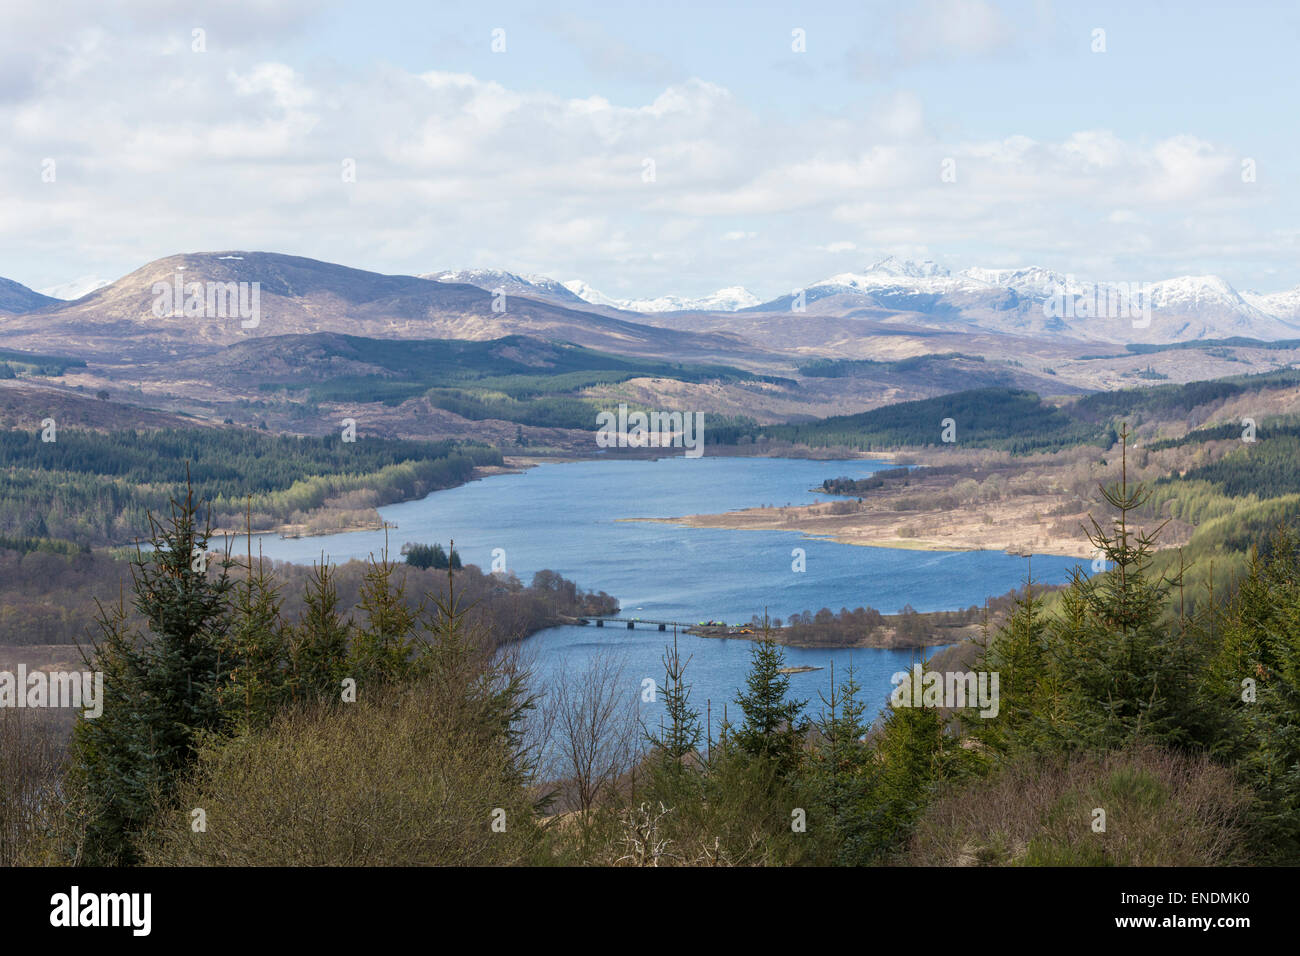 A view over Glen Garry in the Scottish Highlands with Loch Linnhe surrounded by fir trees and mountains Stock Photo